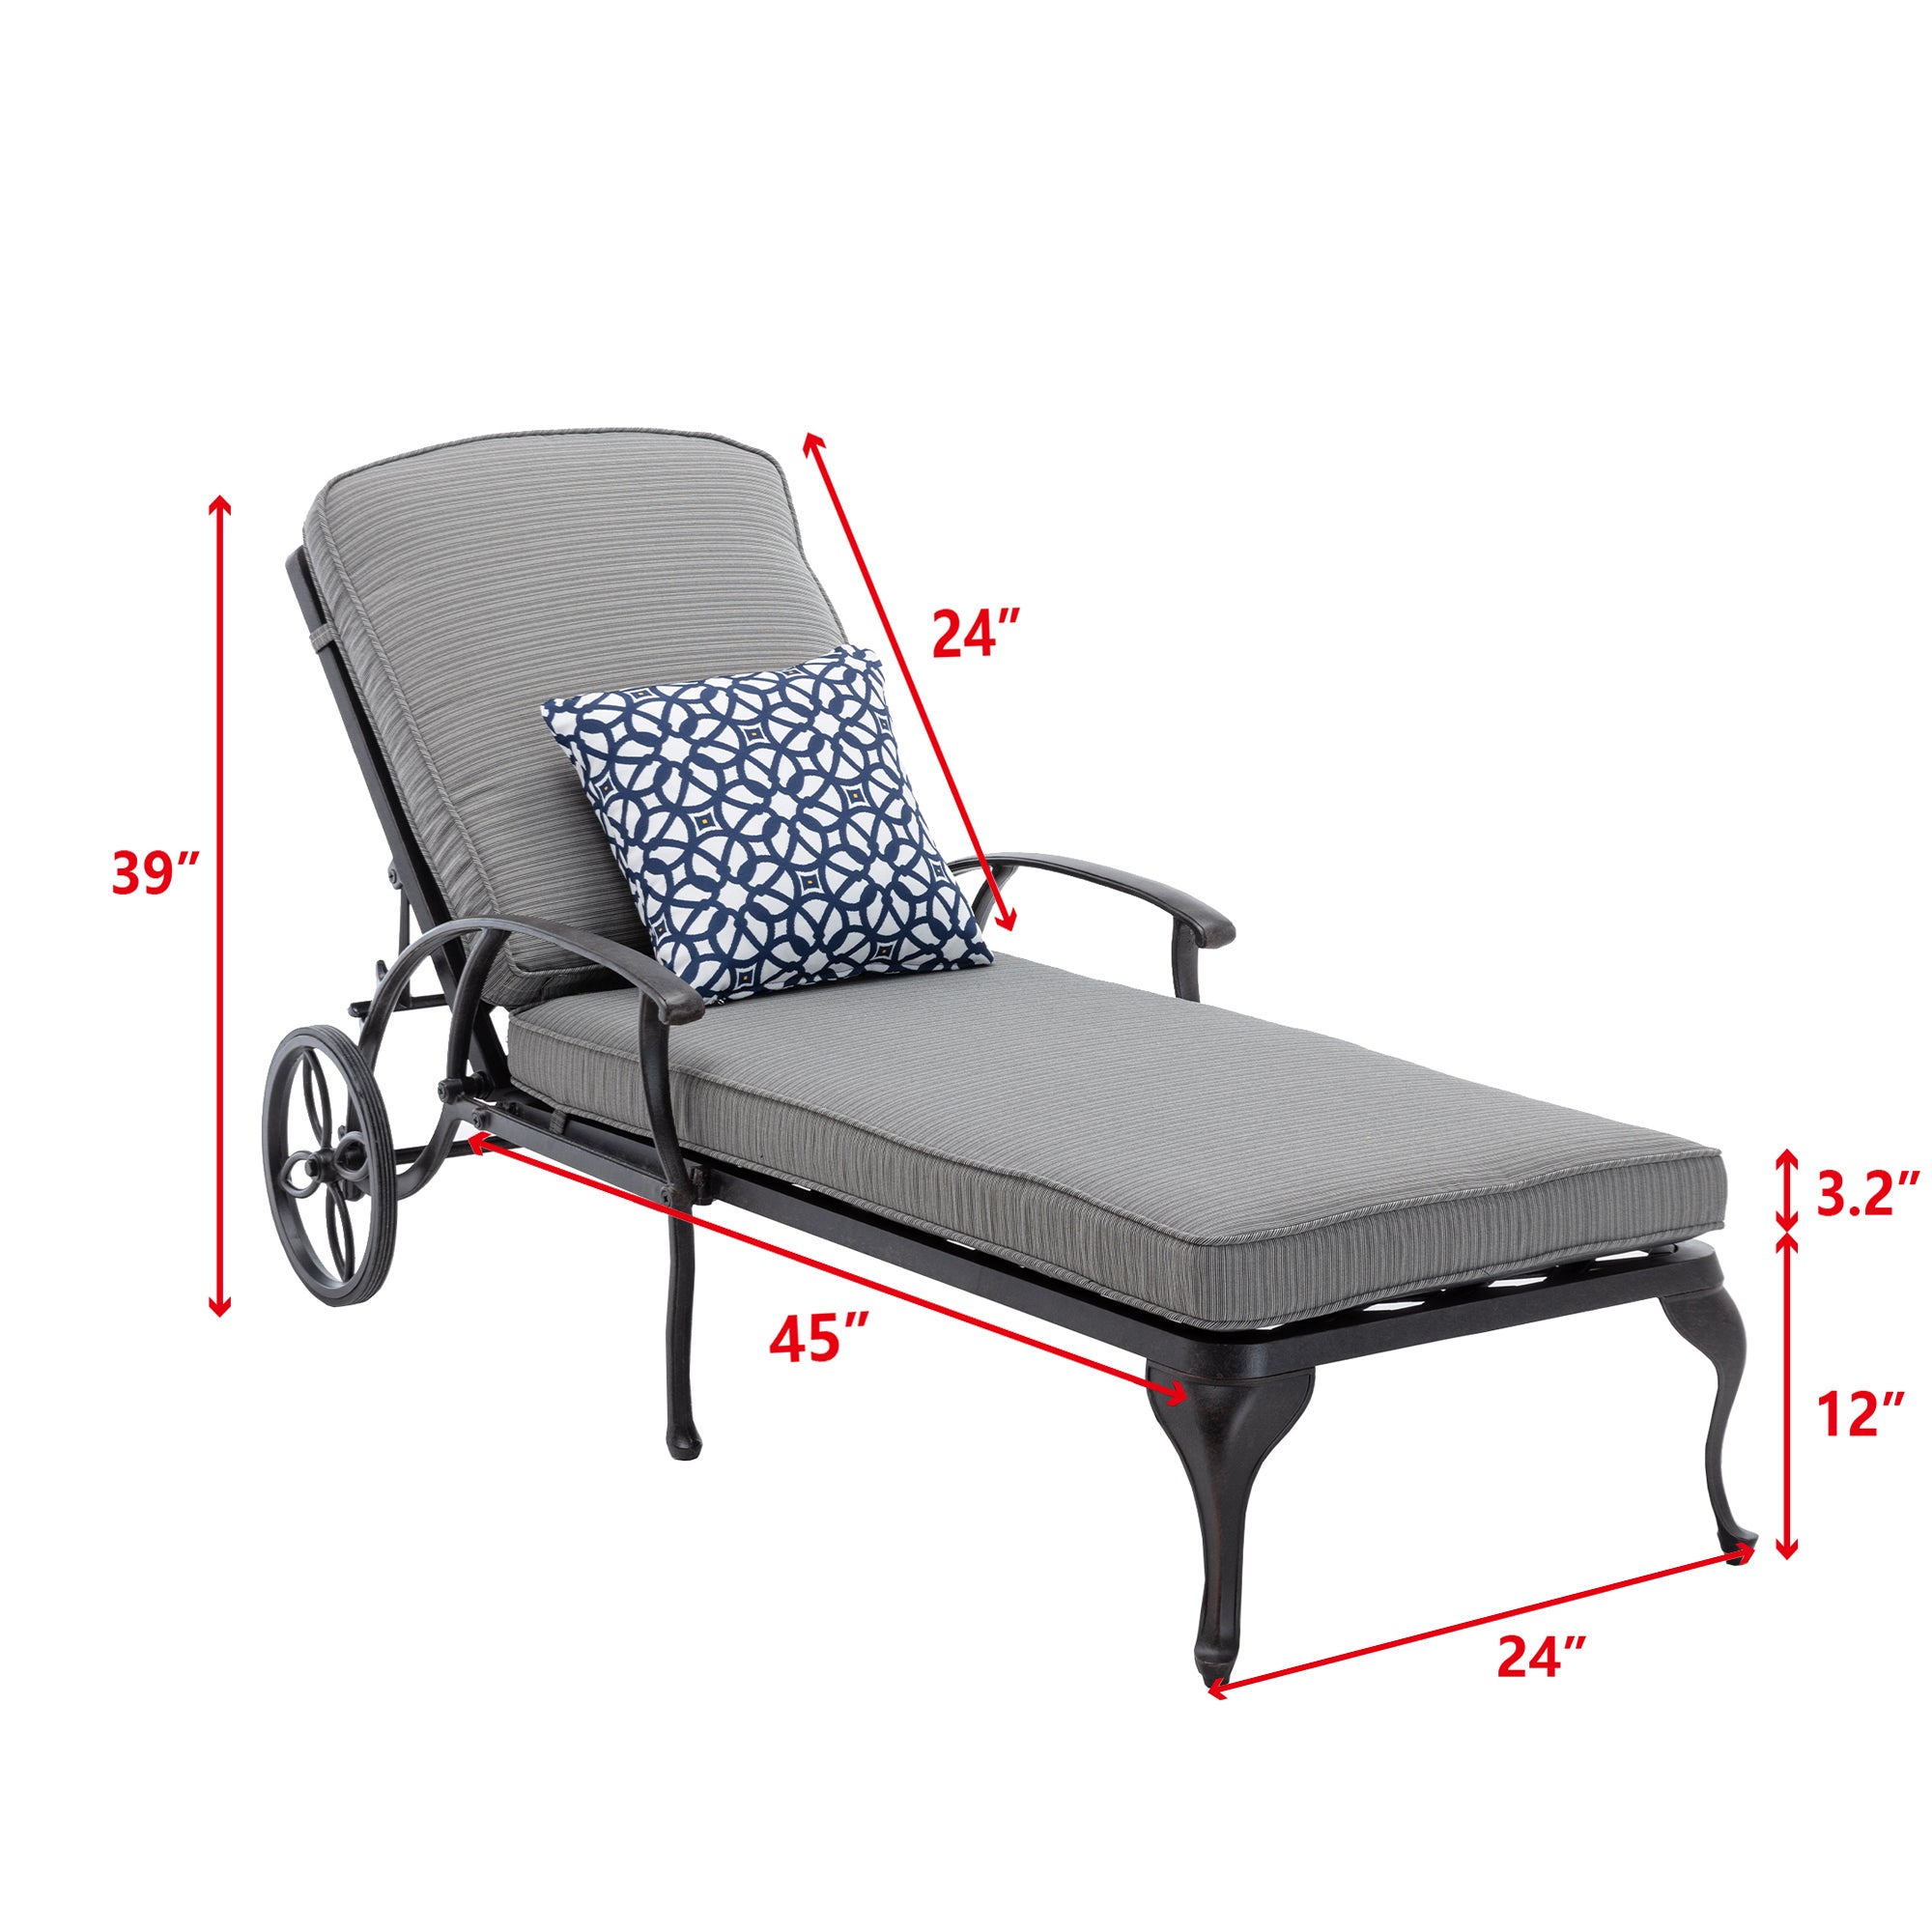 ZNTS Chaise Lounge Outdoor Chair with Navy Blue Cushions, Aluminum Pool Side Sun Lounges with Wheels W1152110448